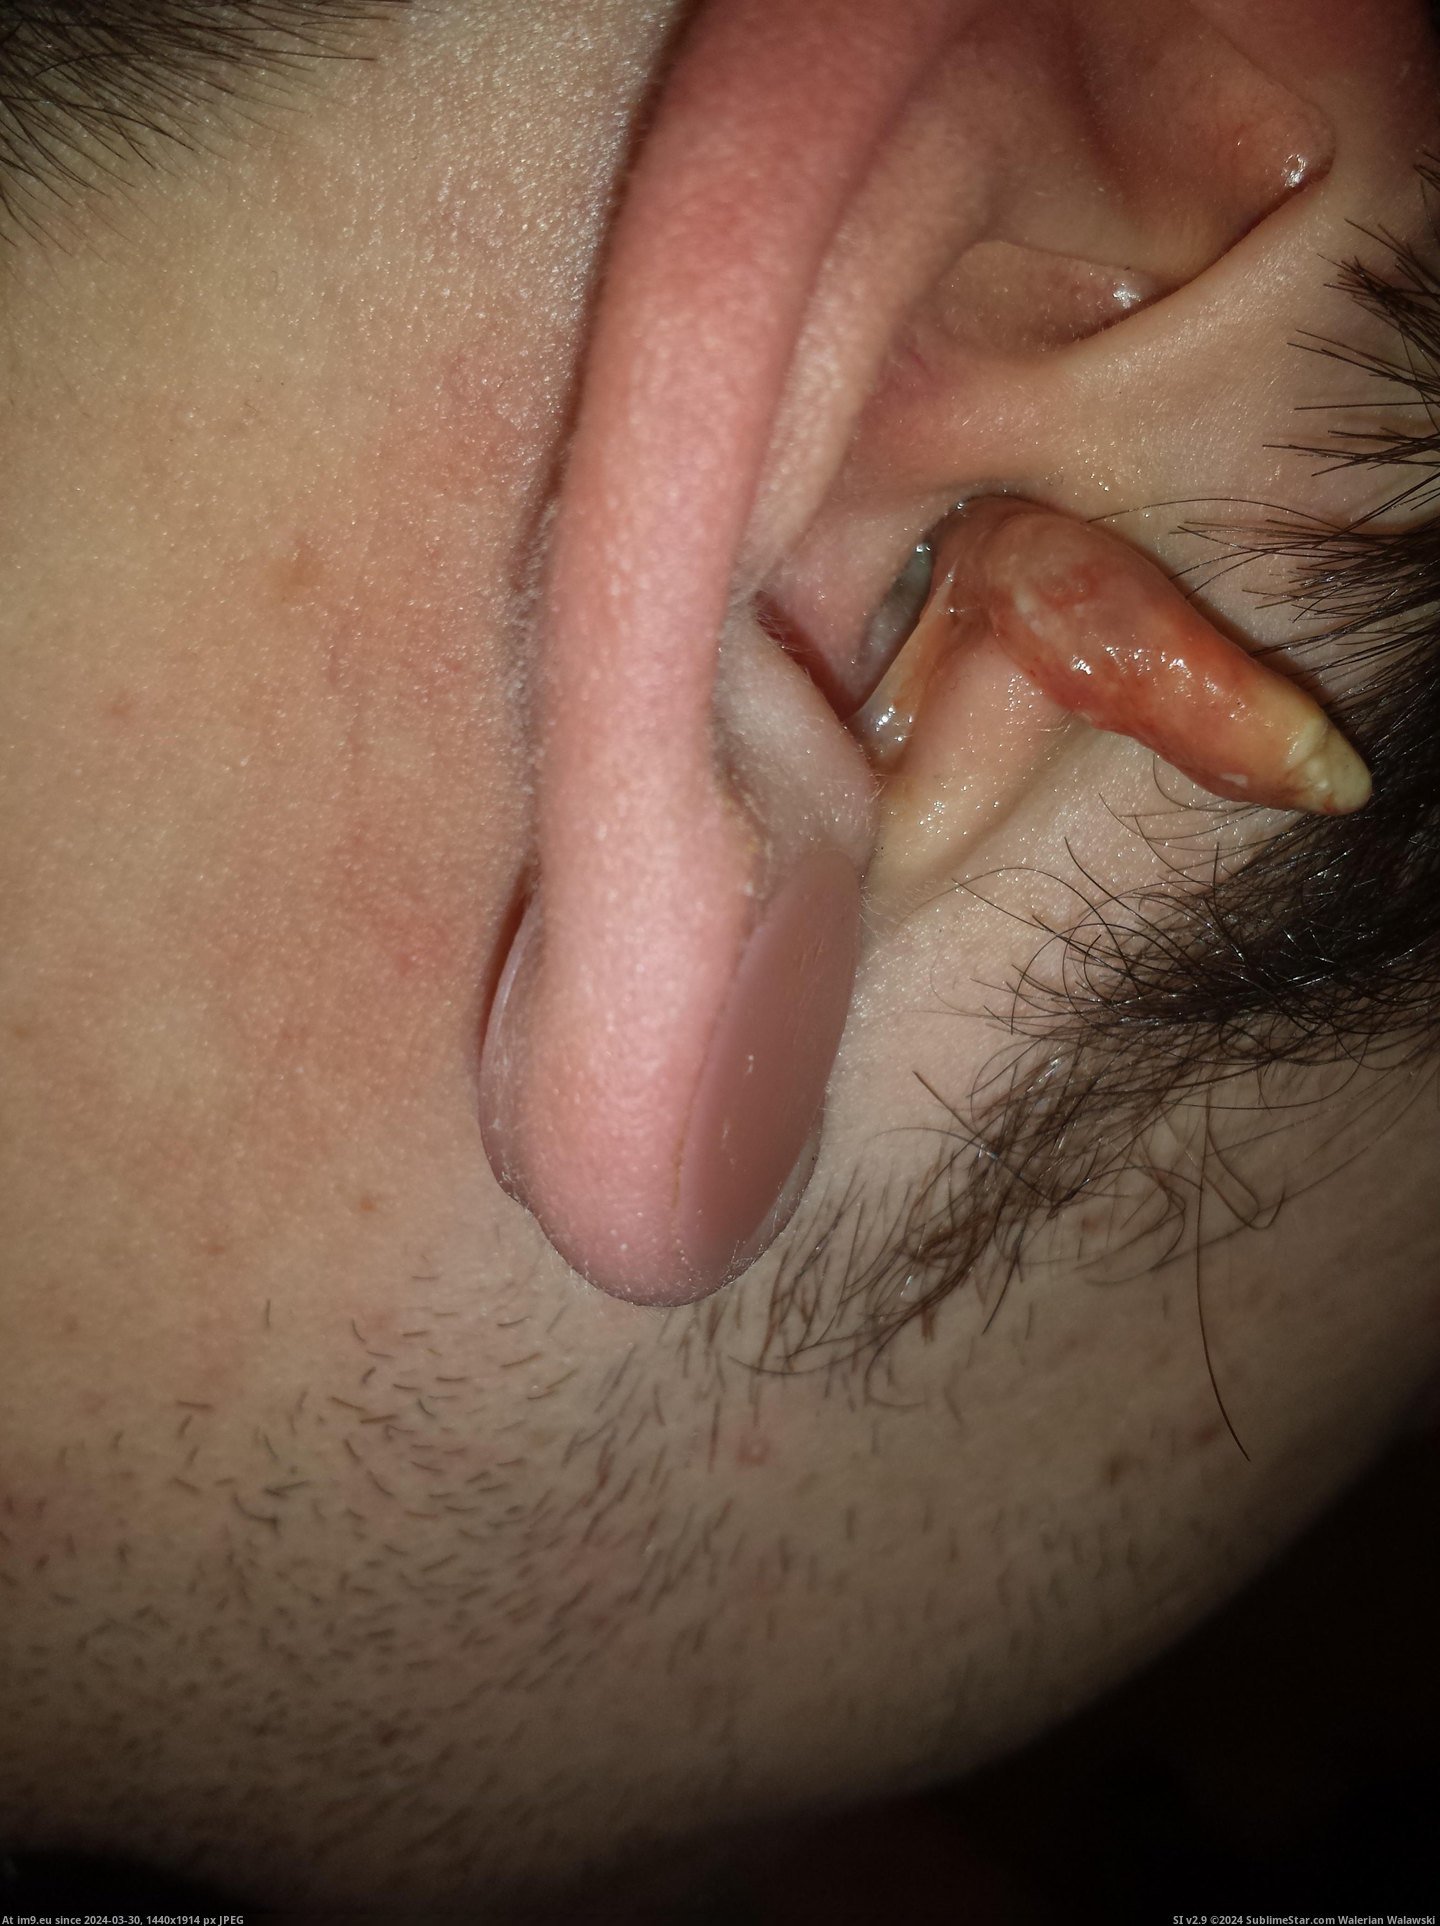 #Wtf #Ear #Infection #Crazy [Wtf] My crazy ear infection 6 Pic. (Изображение из альбом My r/WTF favs))